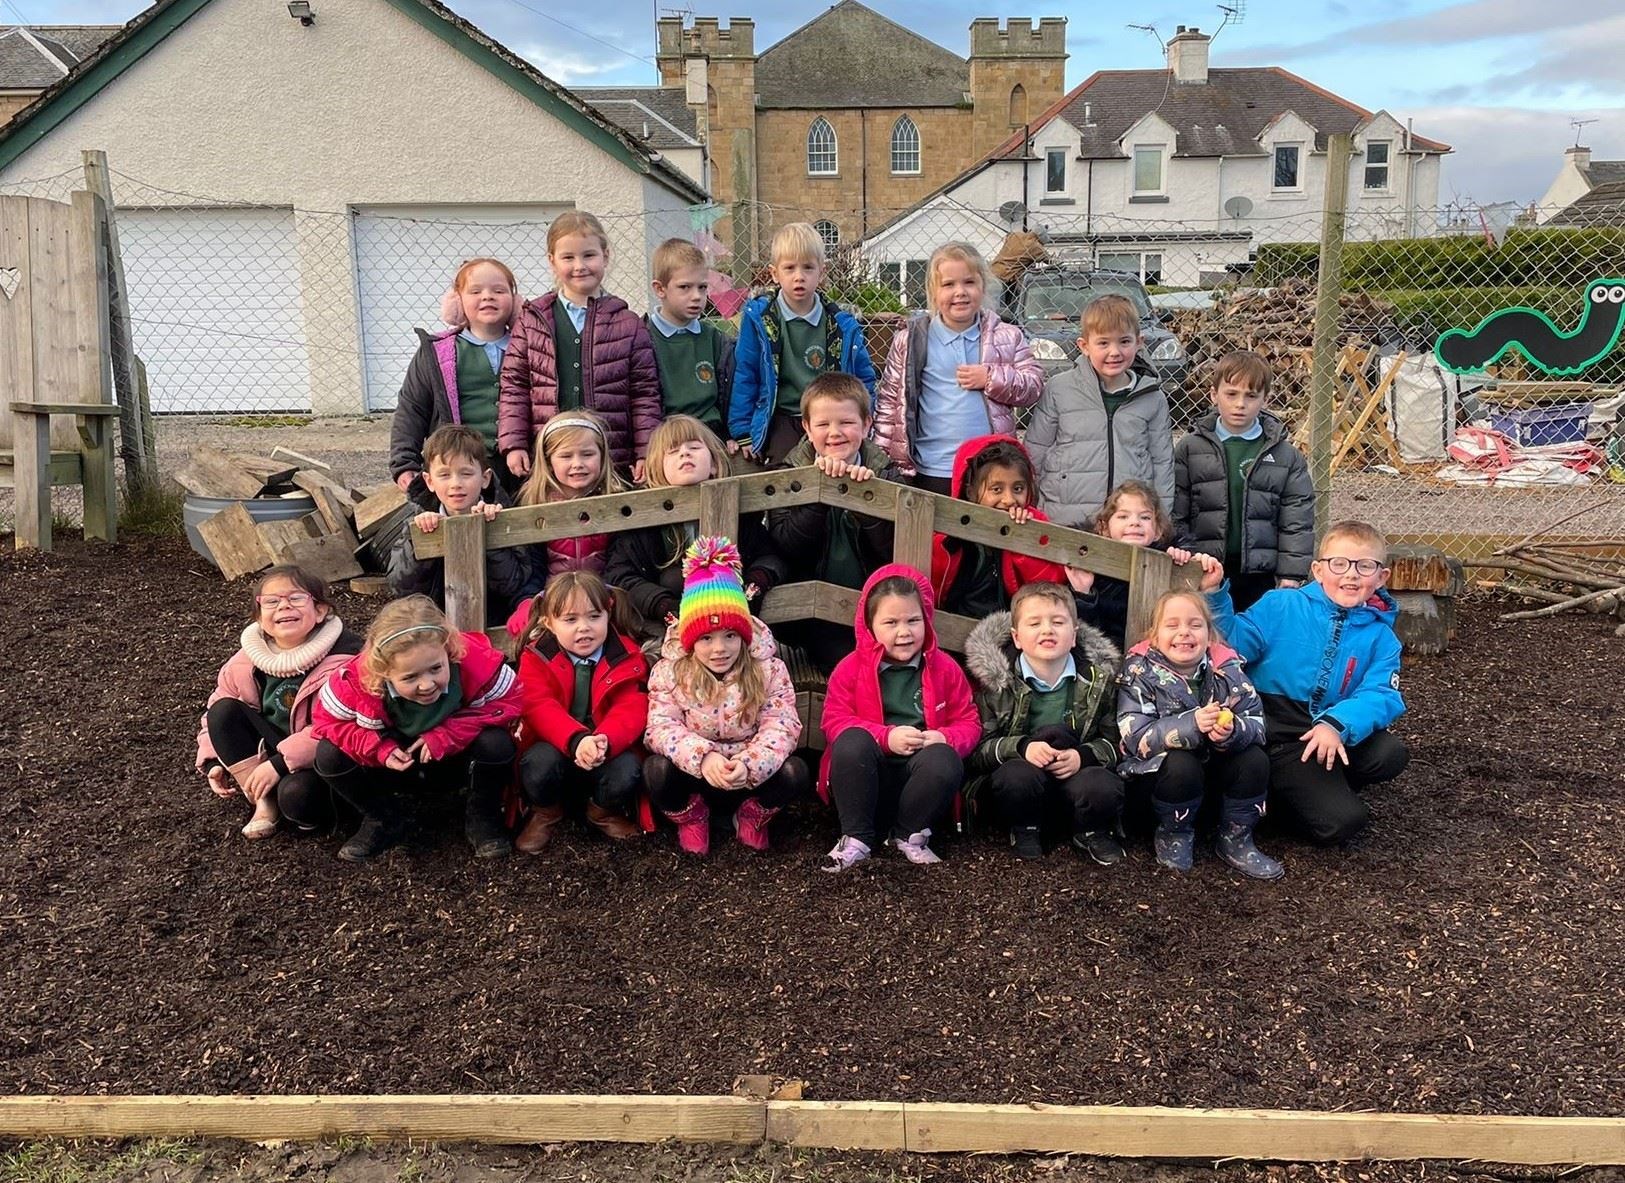 Knockbreck Primary School benefited from a new barked area in their playground.